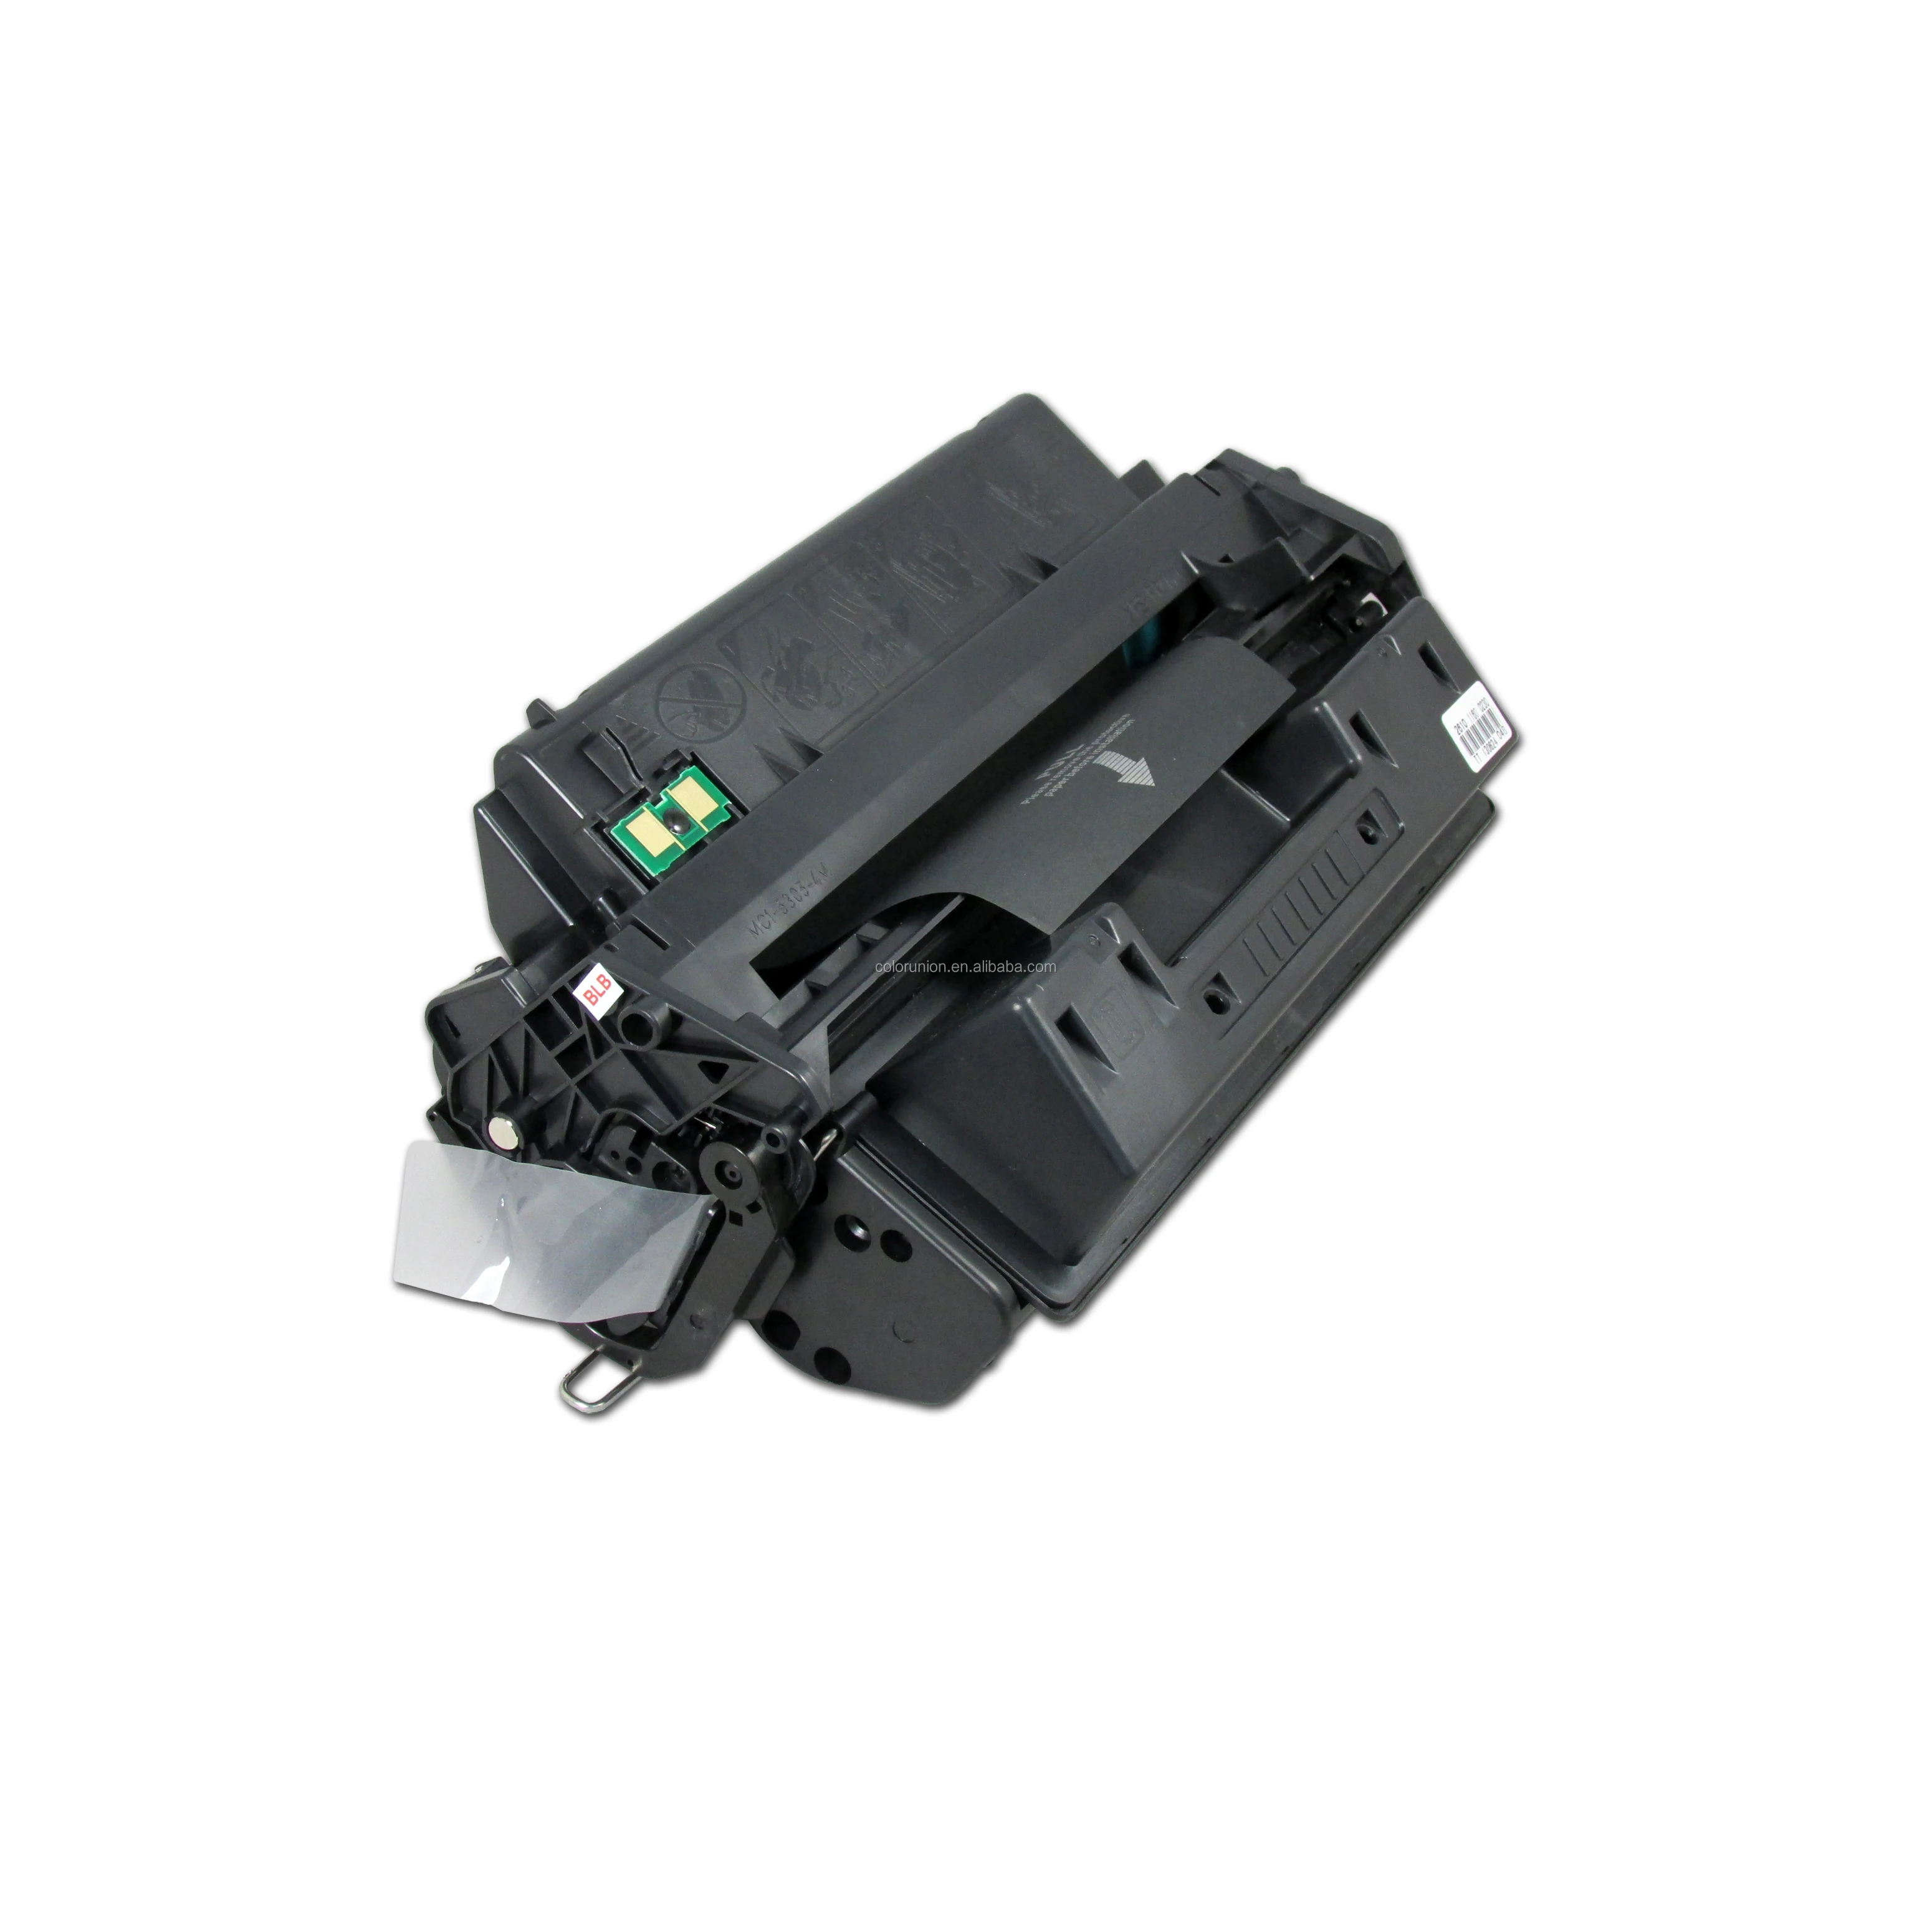 get USD500 coupon for China premium toner cartridges Q2610A 10A for HP Laserjet 2300